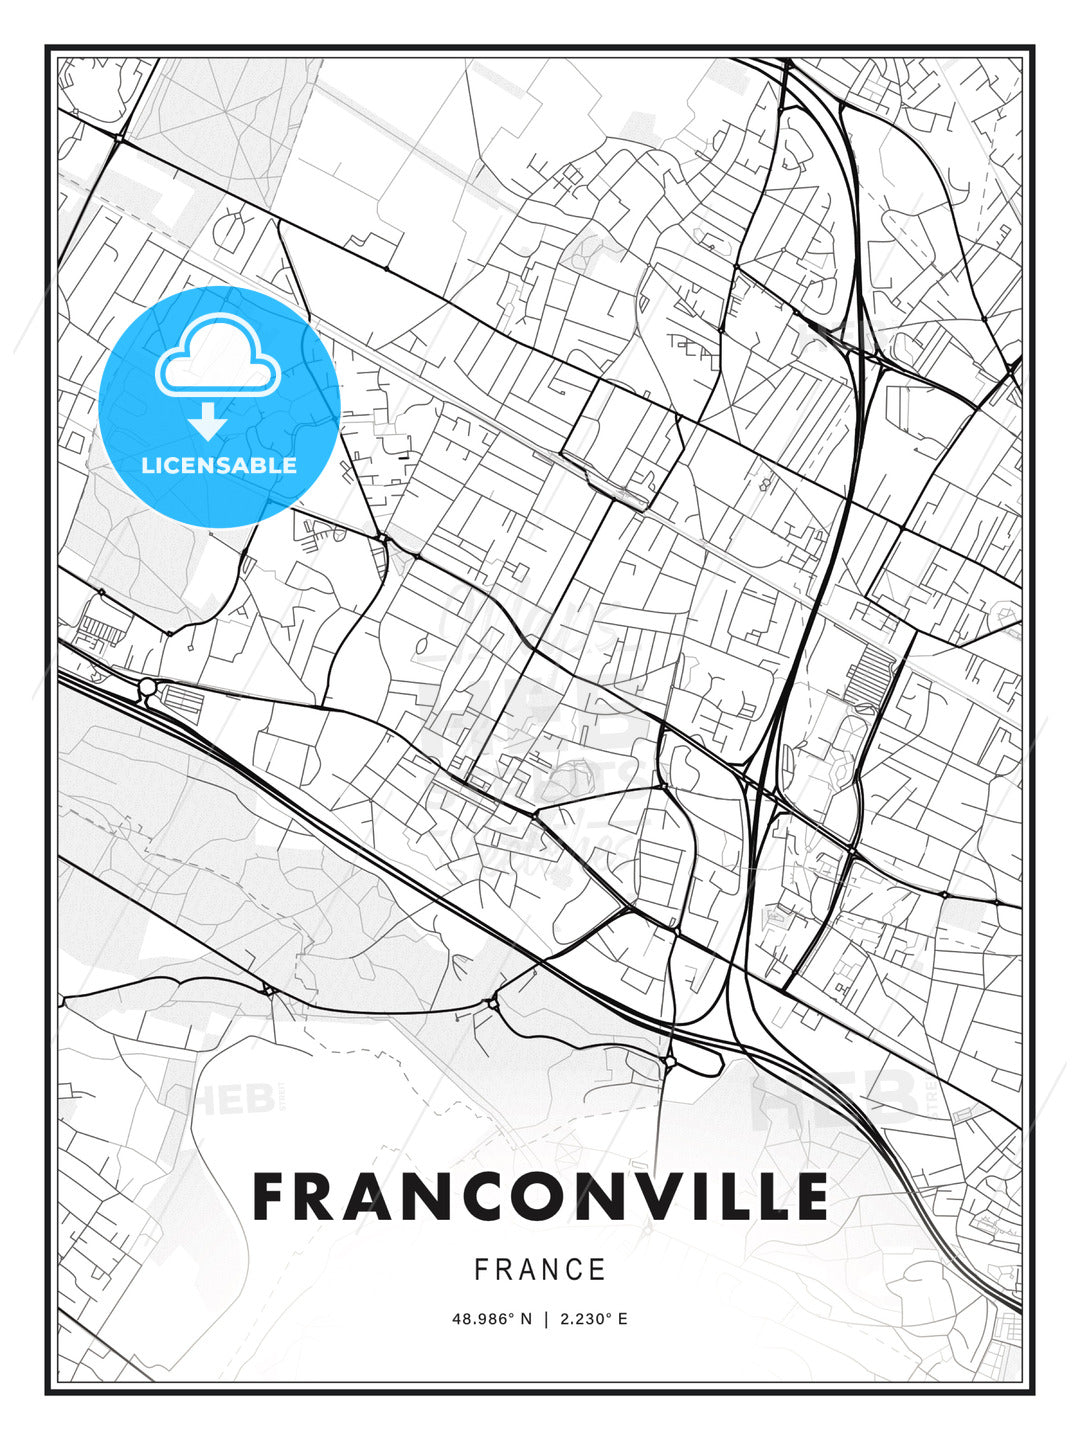 Franconville, France, Modern Print Template in Various Formats - HEBSTREITS Sketches